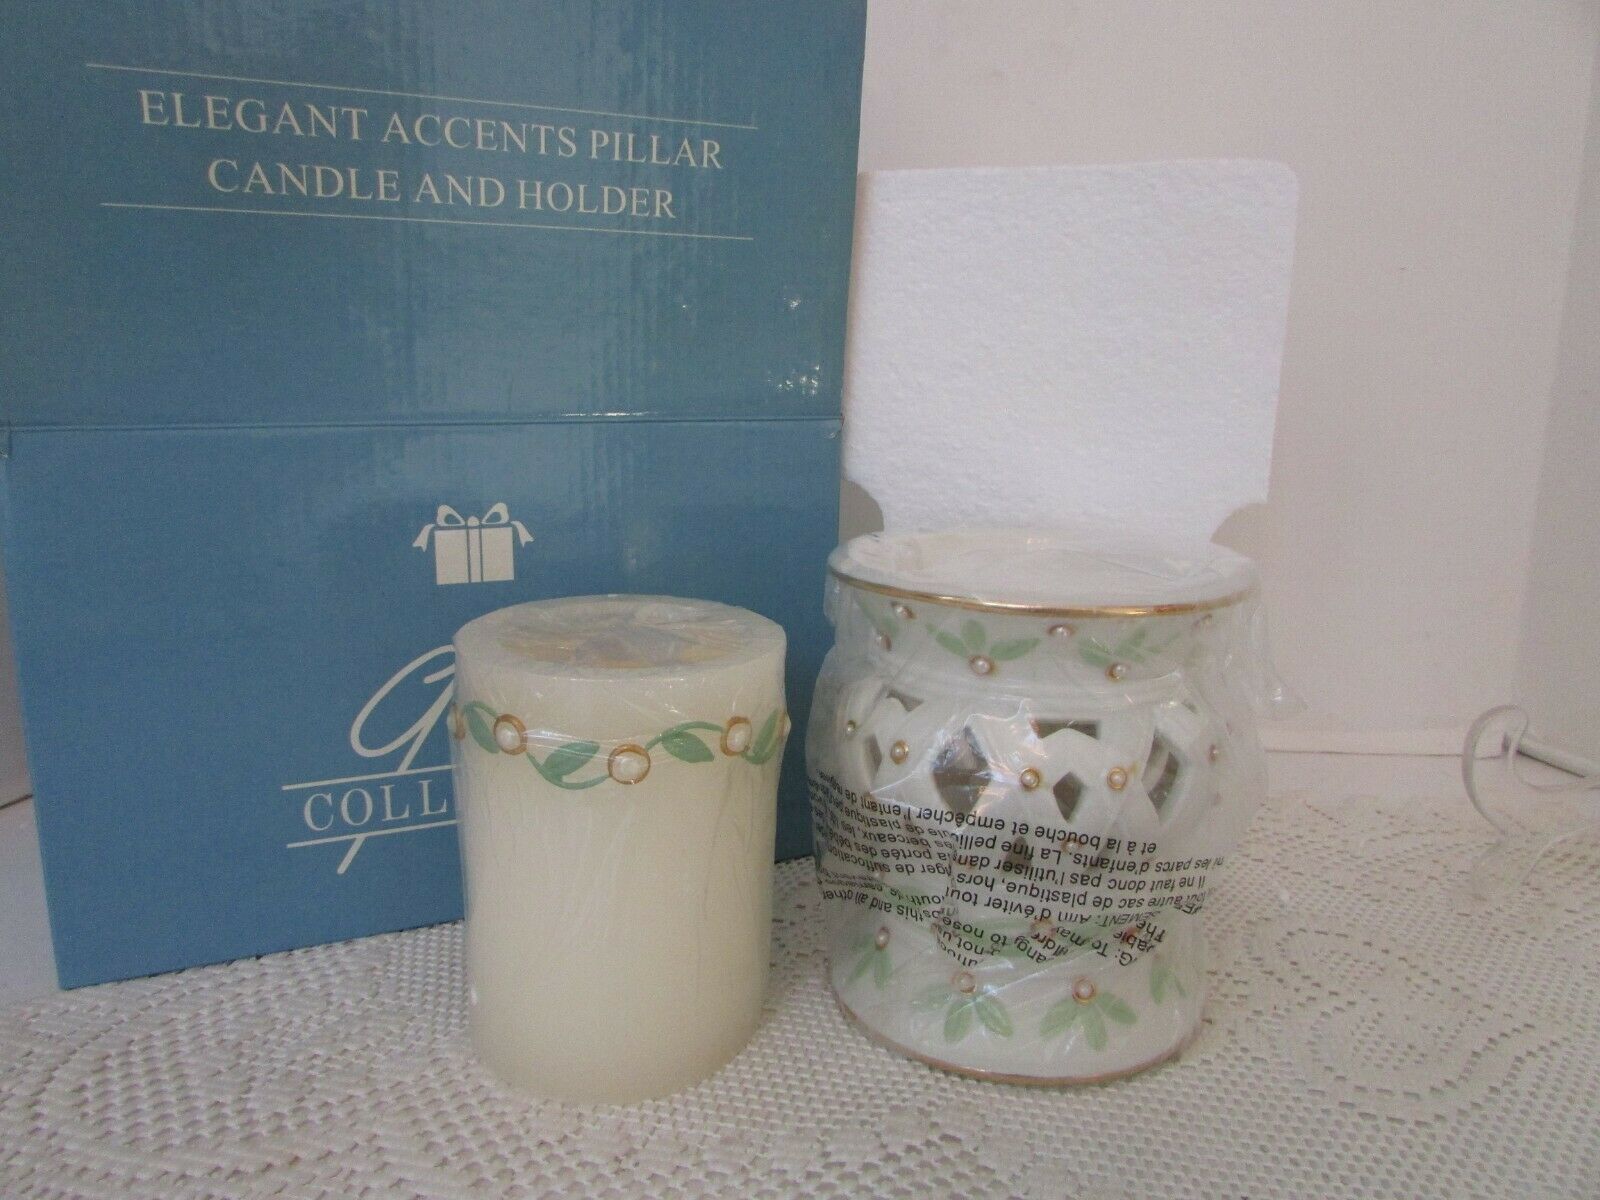 AVON GIFT COLLECTION ELEGANT ACCENTS CANDLE AND HOLDER 2003 NIB  - $12.82